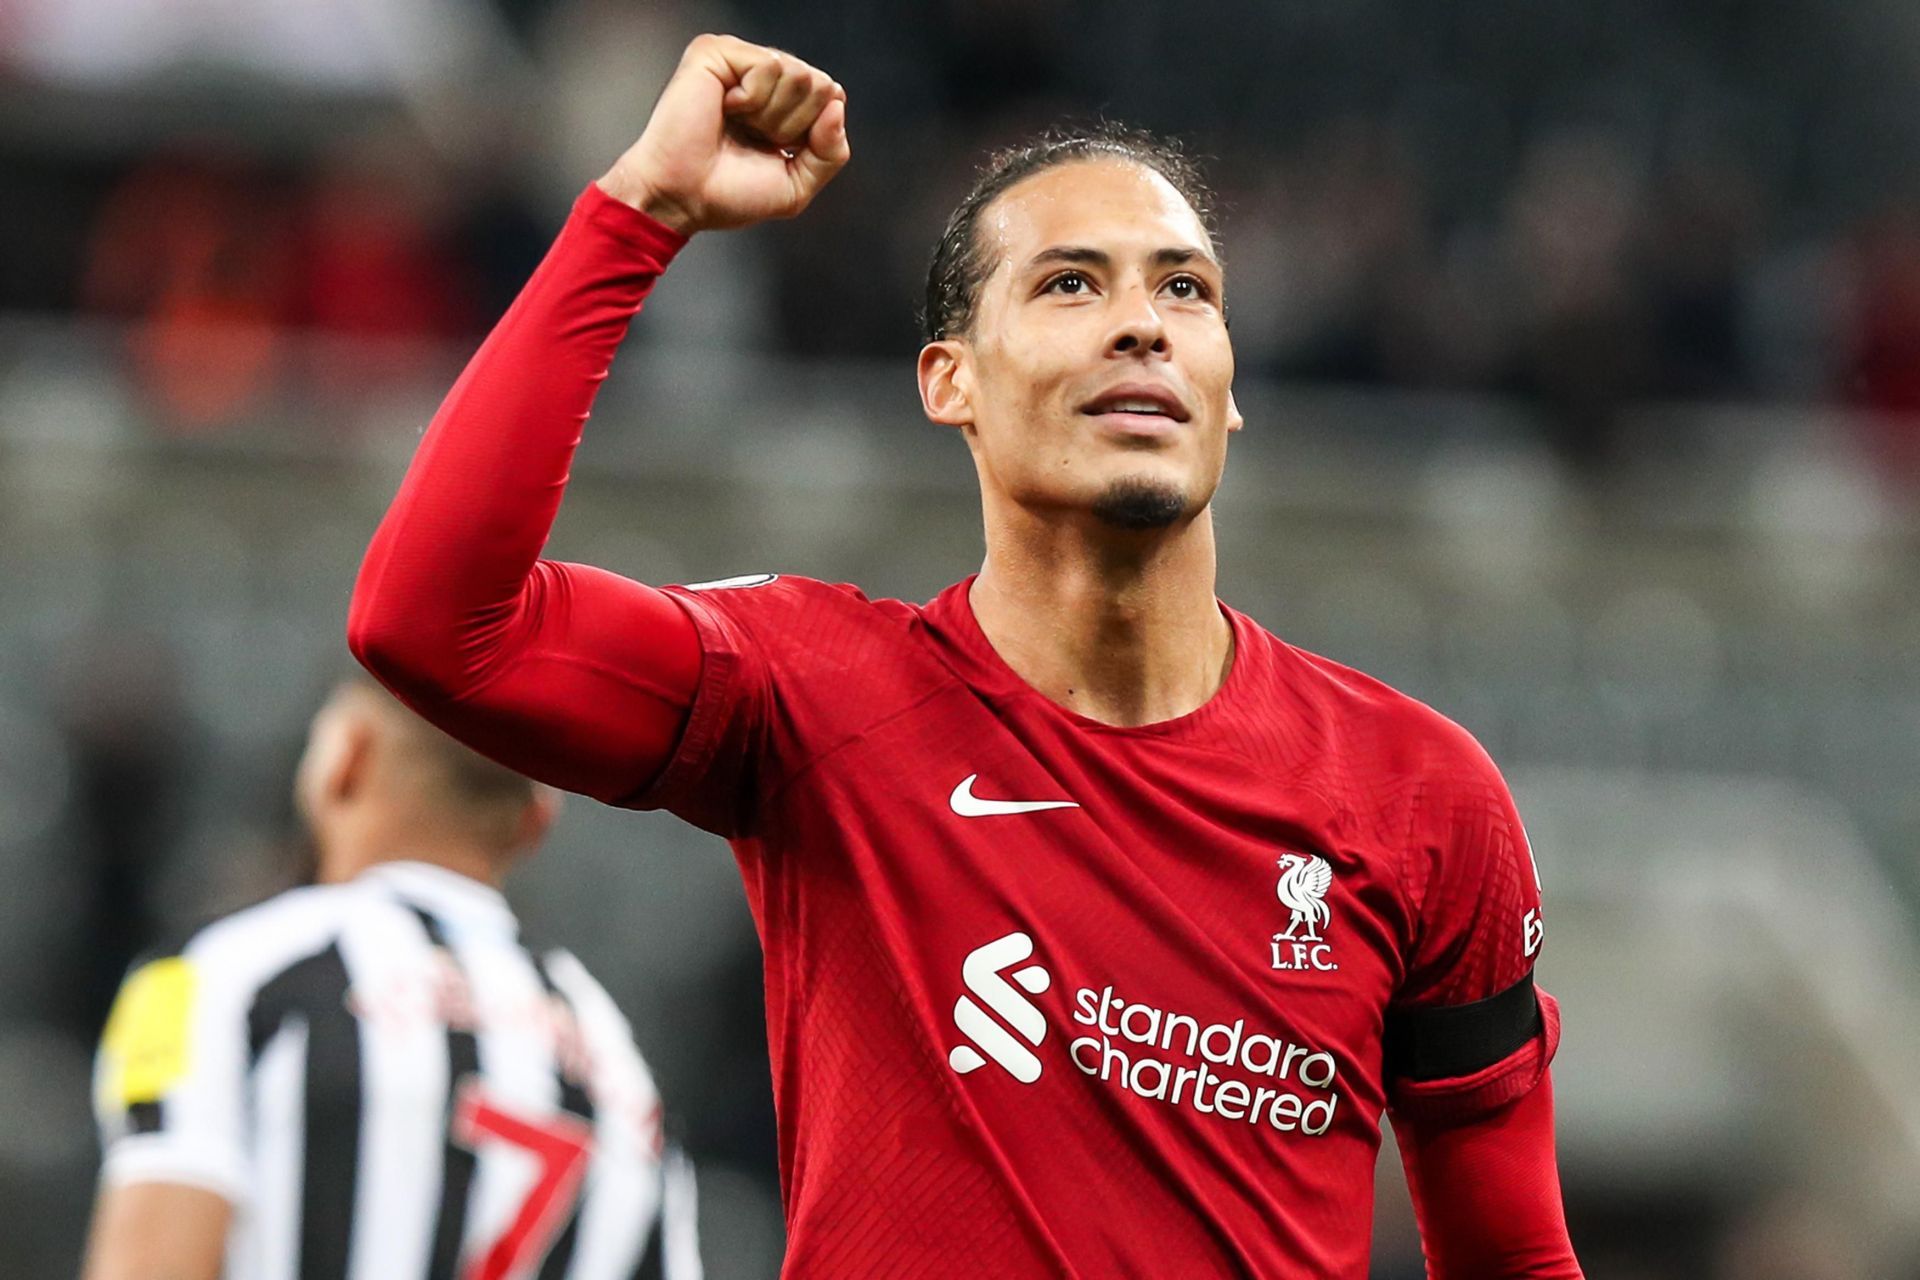 Virgil Van Dijk is one of the most senior players in the Liveprool dressing room